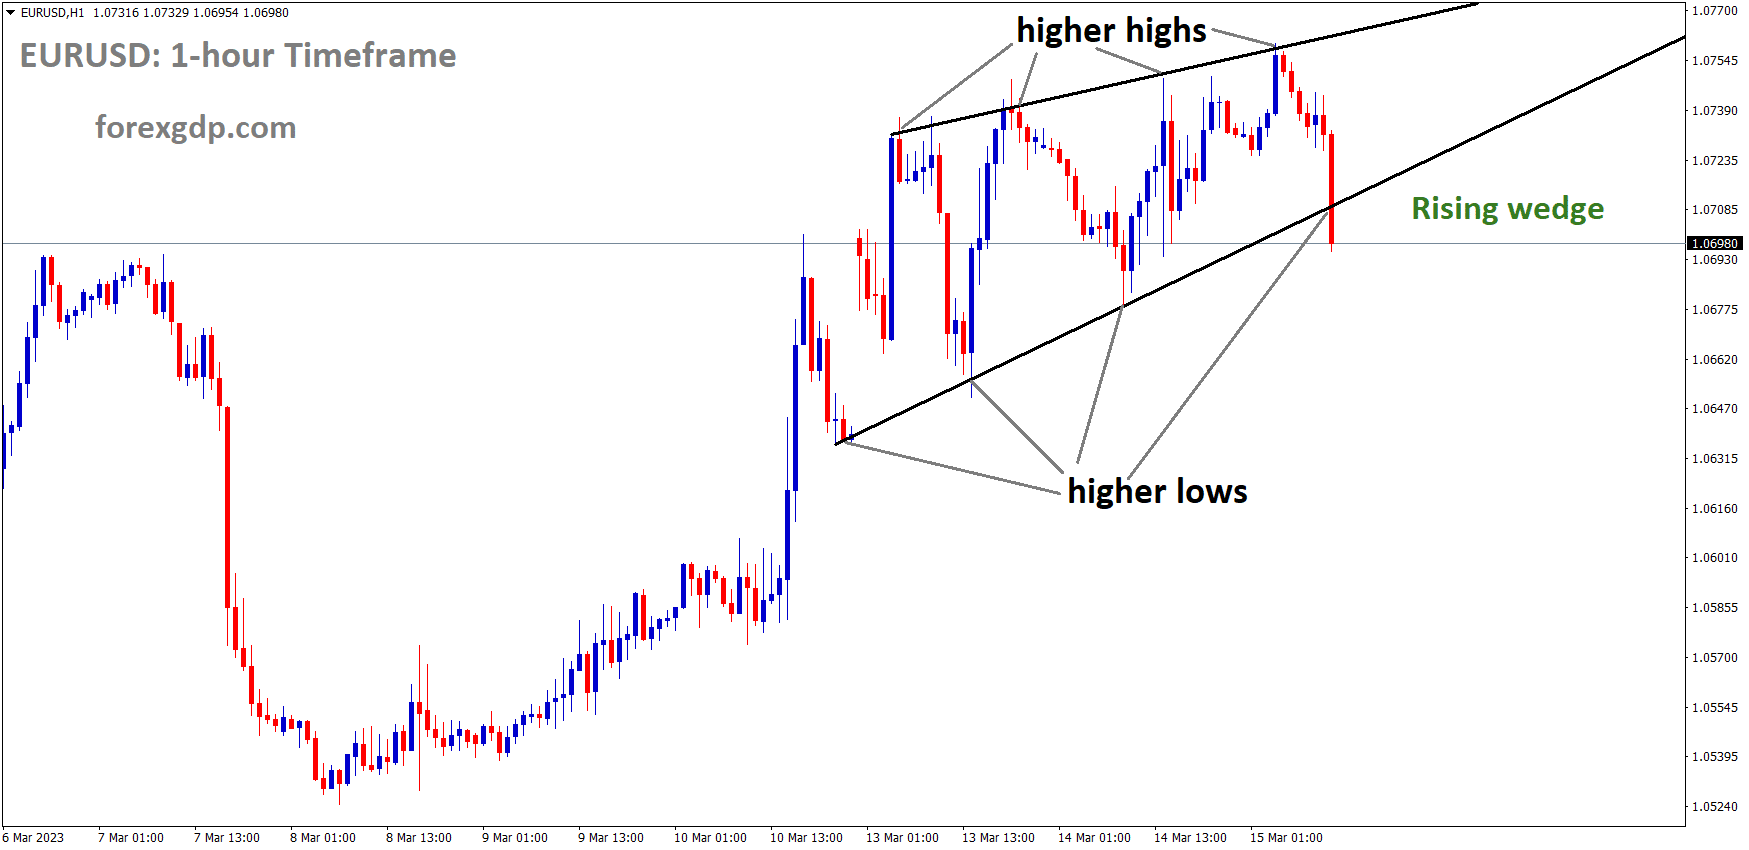 EURUSD is moving in the Rising wedge pattern and the market has reached the higher low area of the pattern